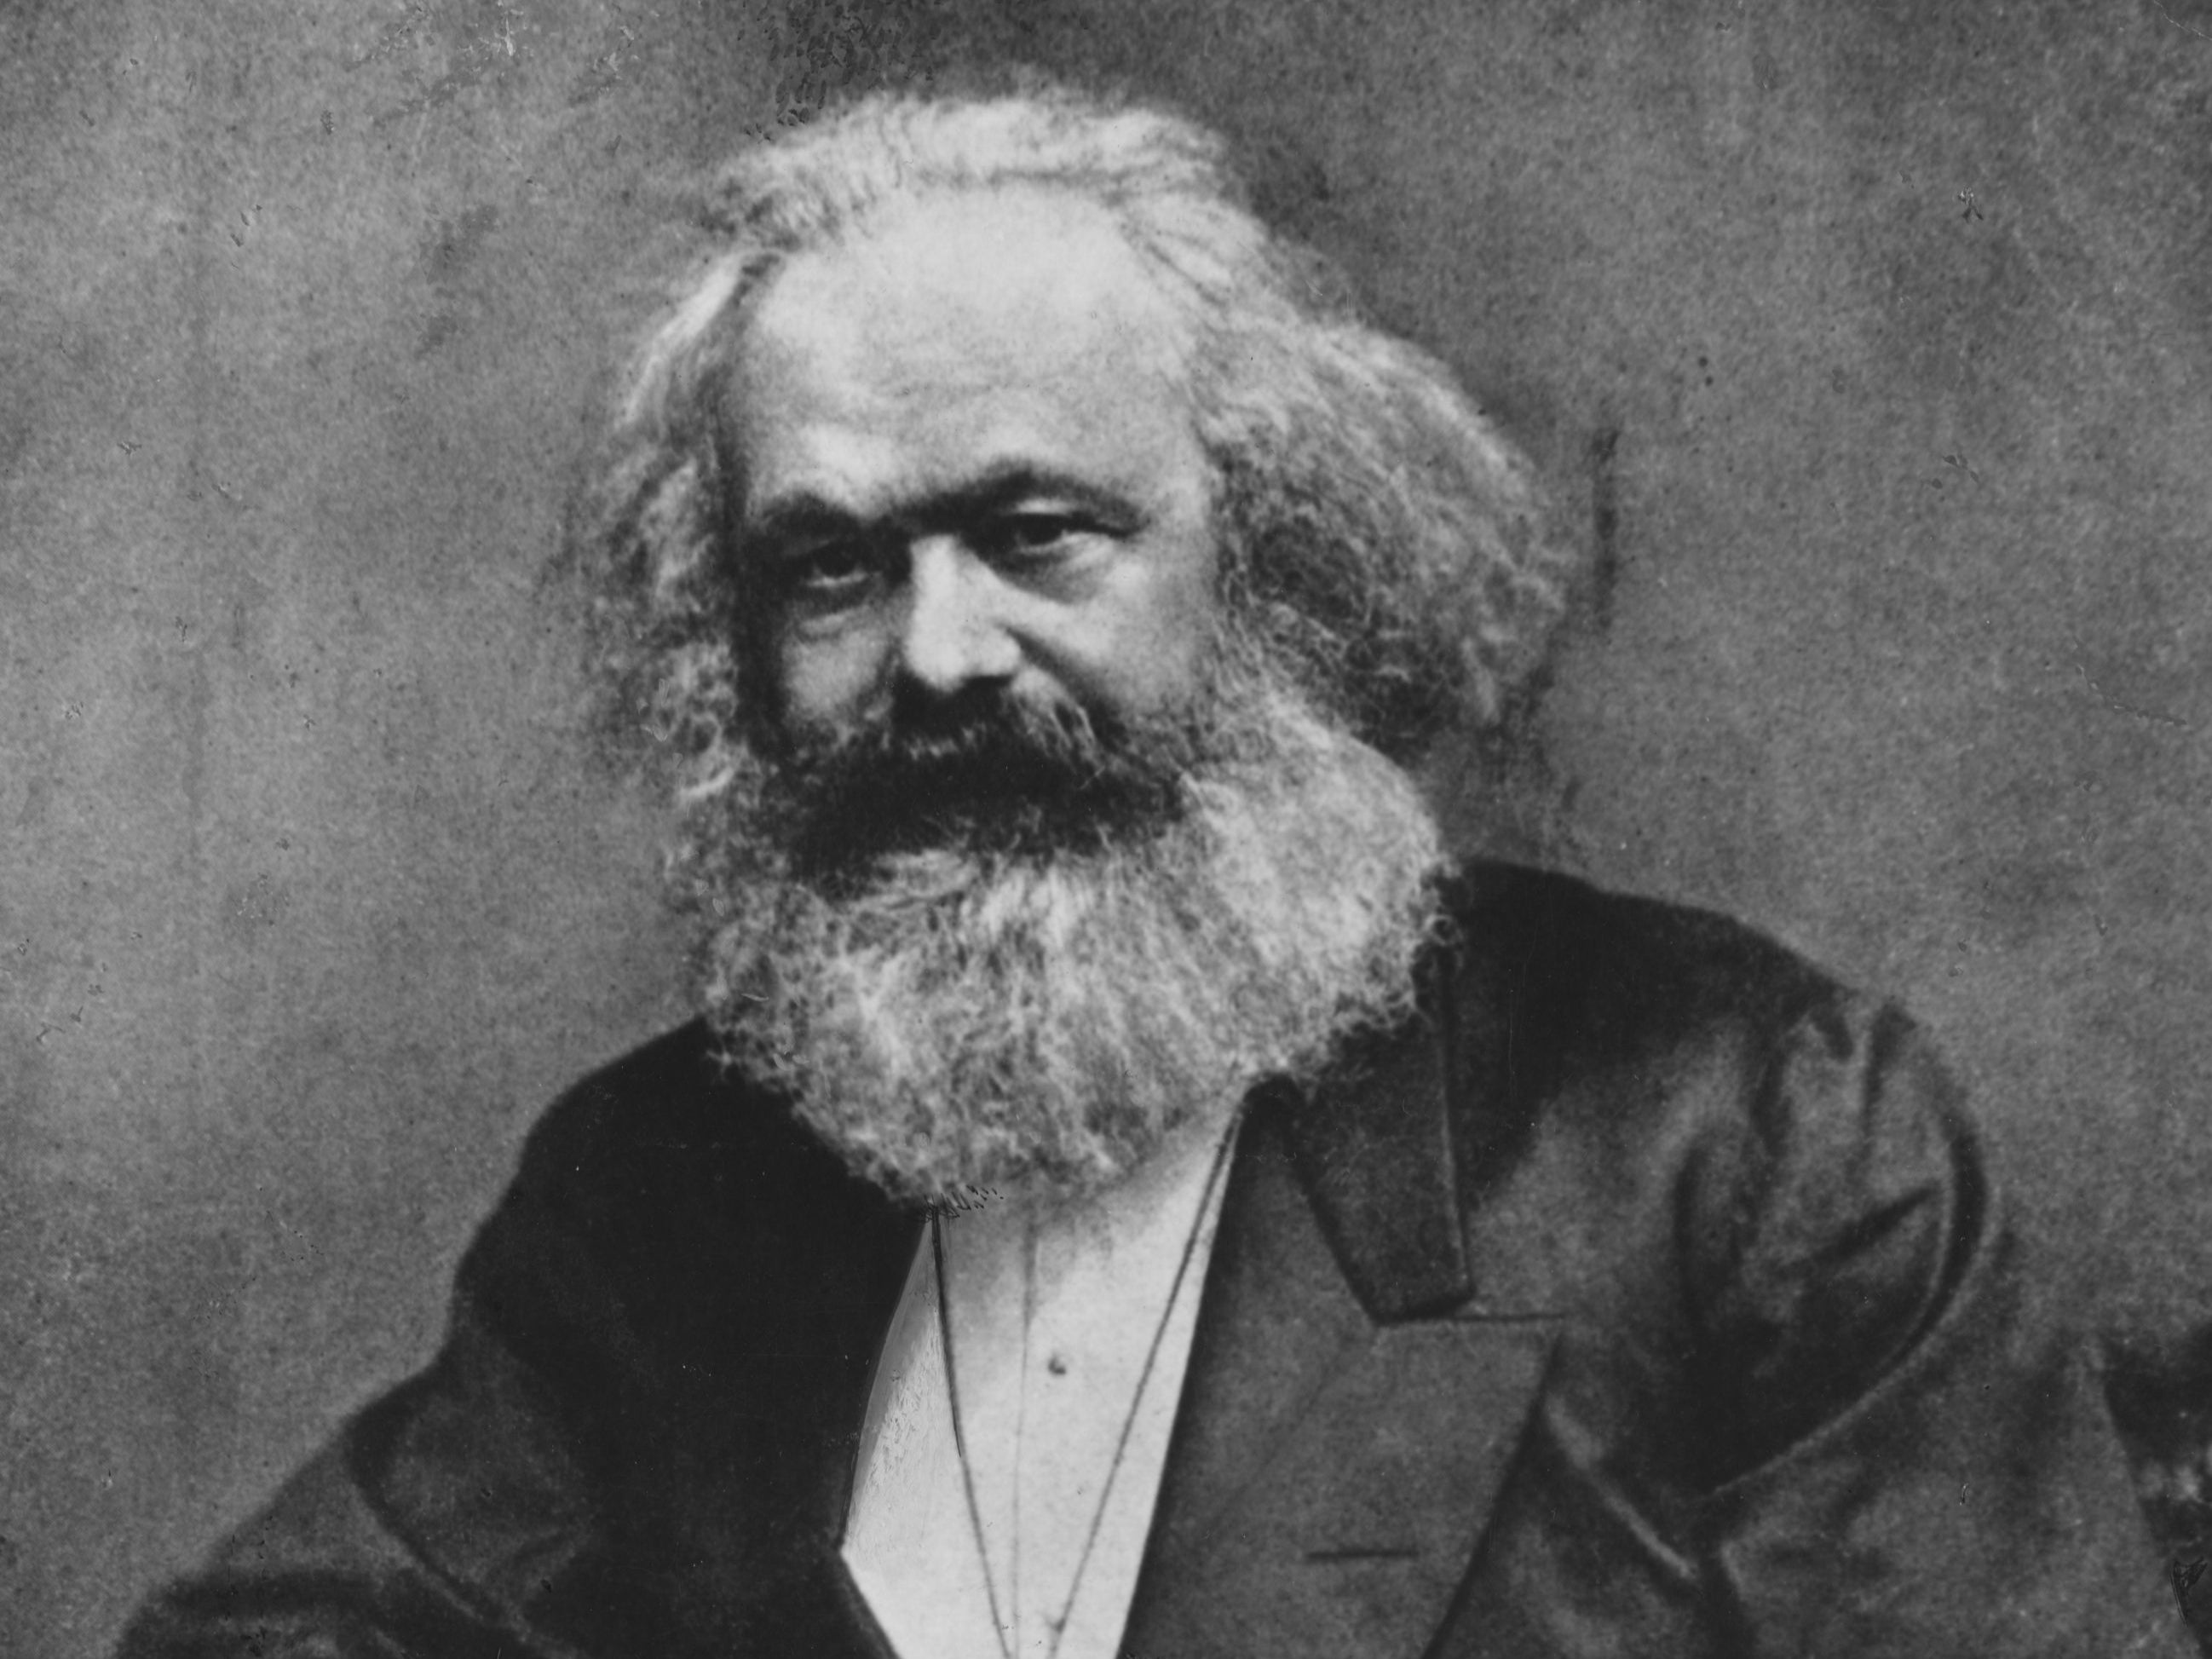 The author clambers over the edifice of Karl Marx like an indefatigable spider, laying his charges